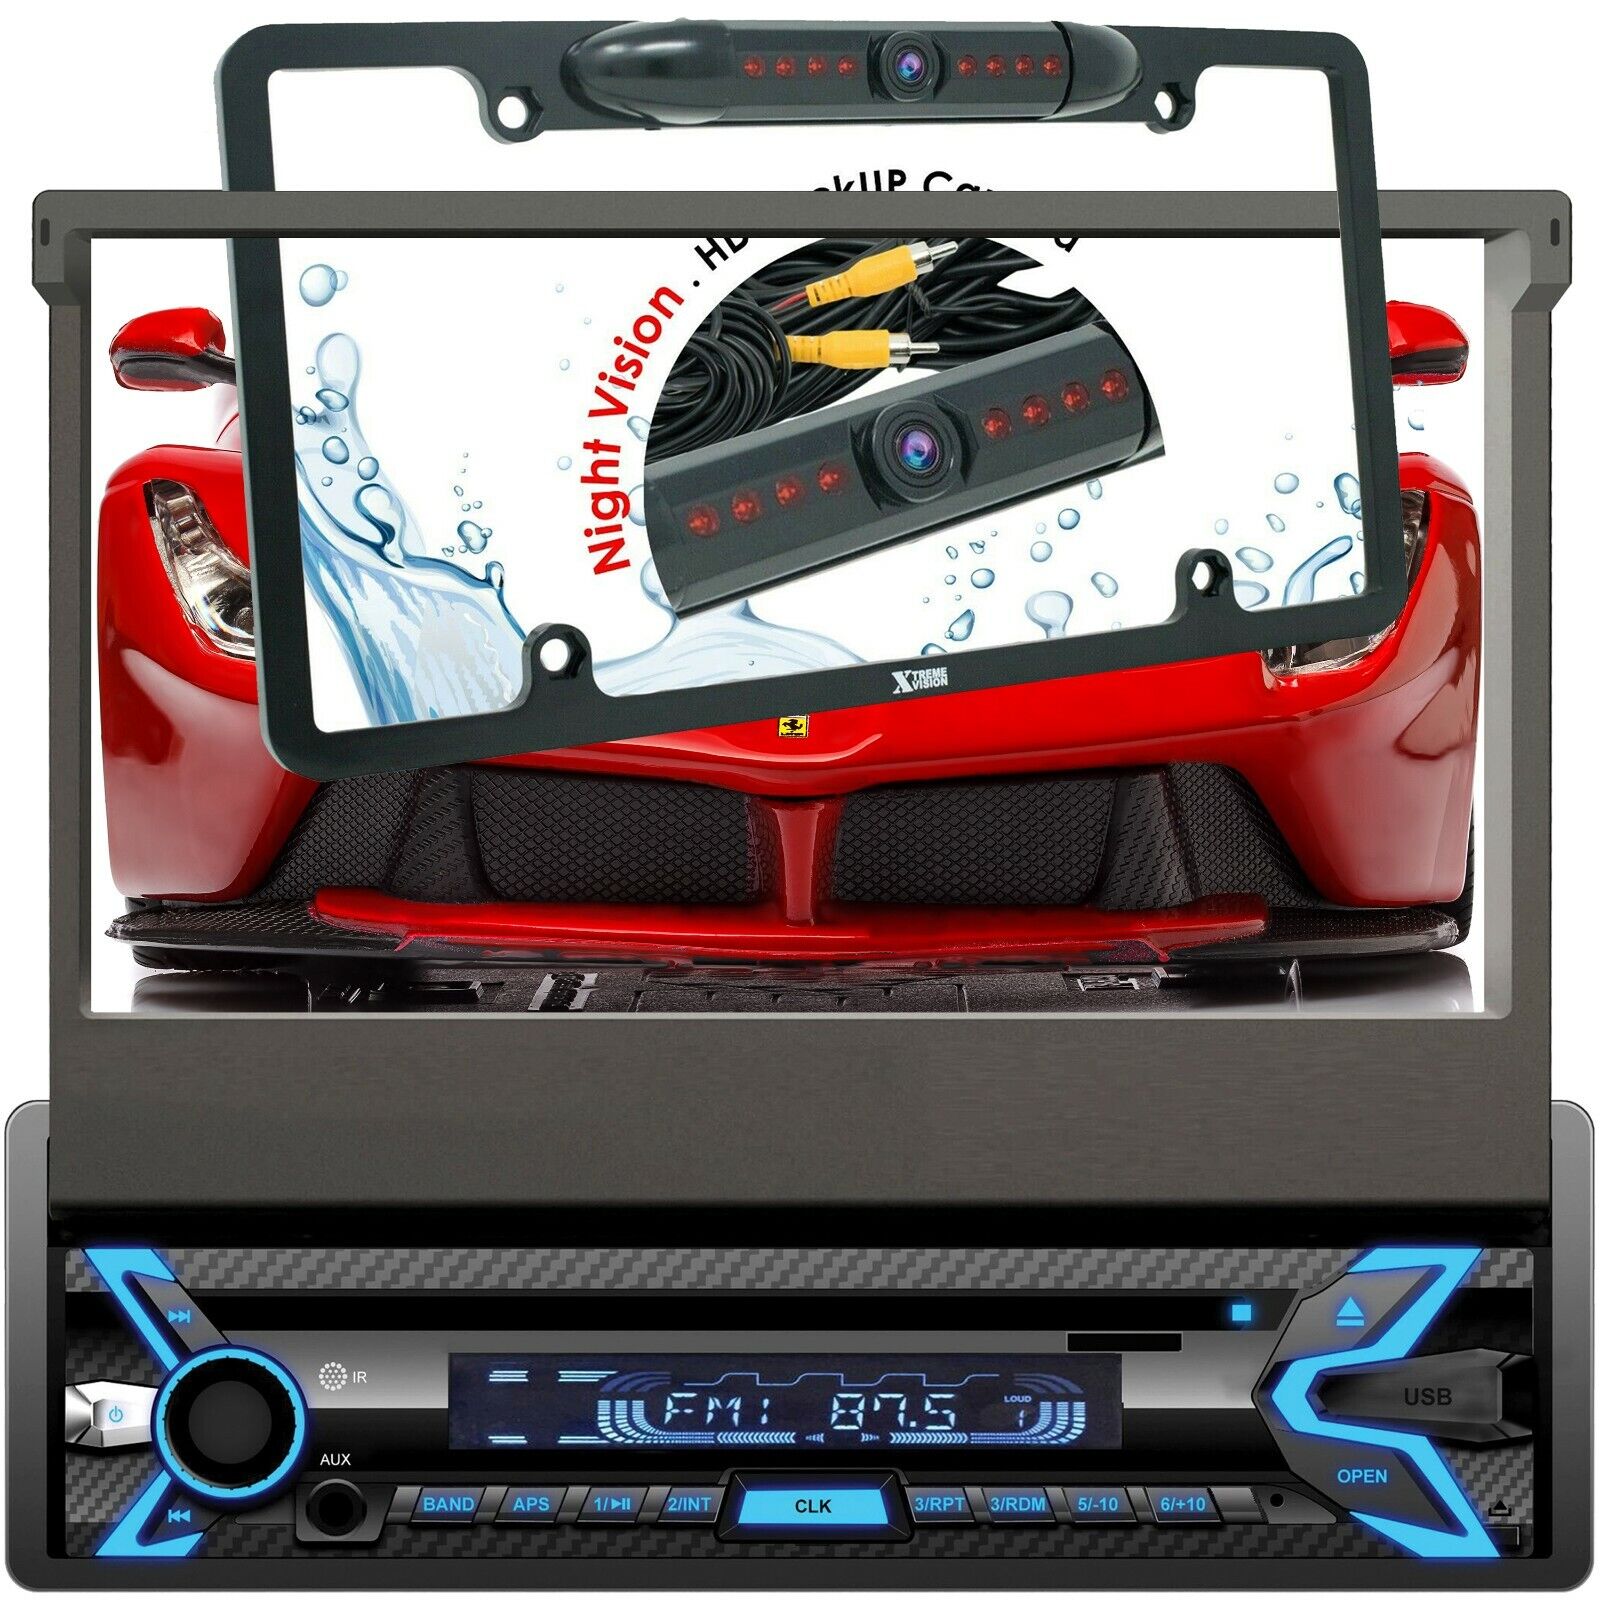 Audiotek AT-S7920BT 1-DIN 7" Touch Car Stereo w/ Bluetooth +